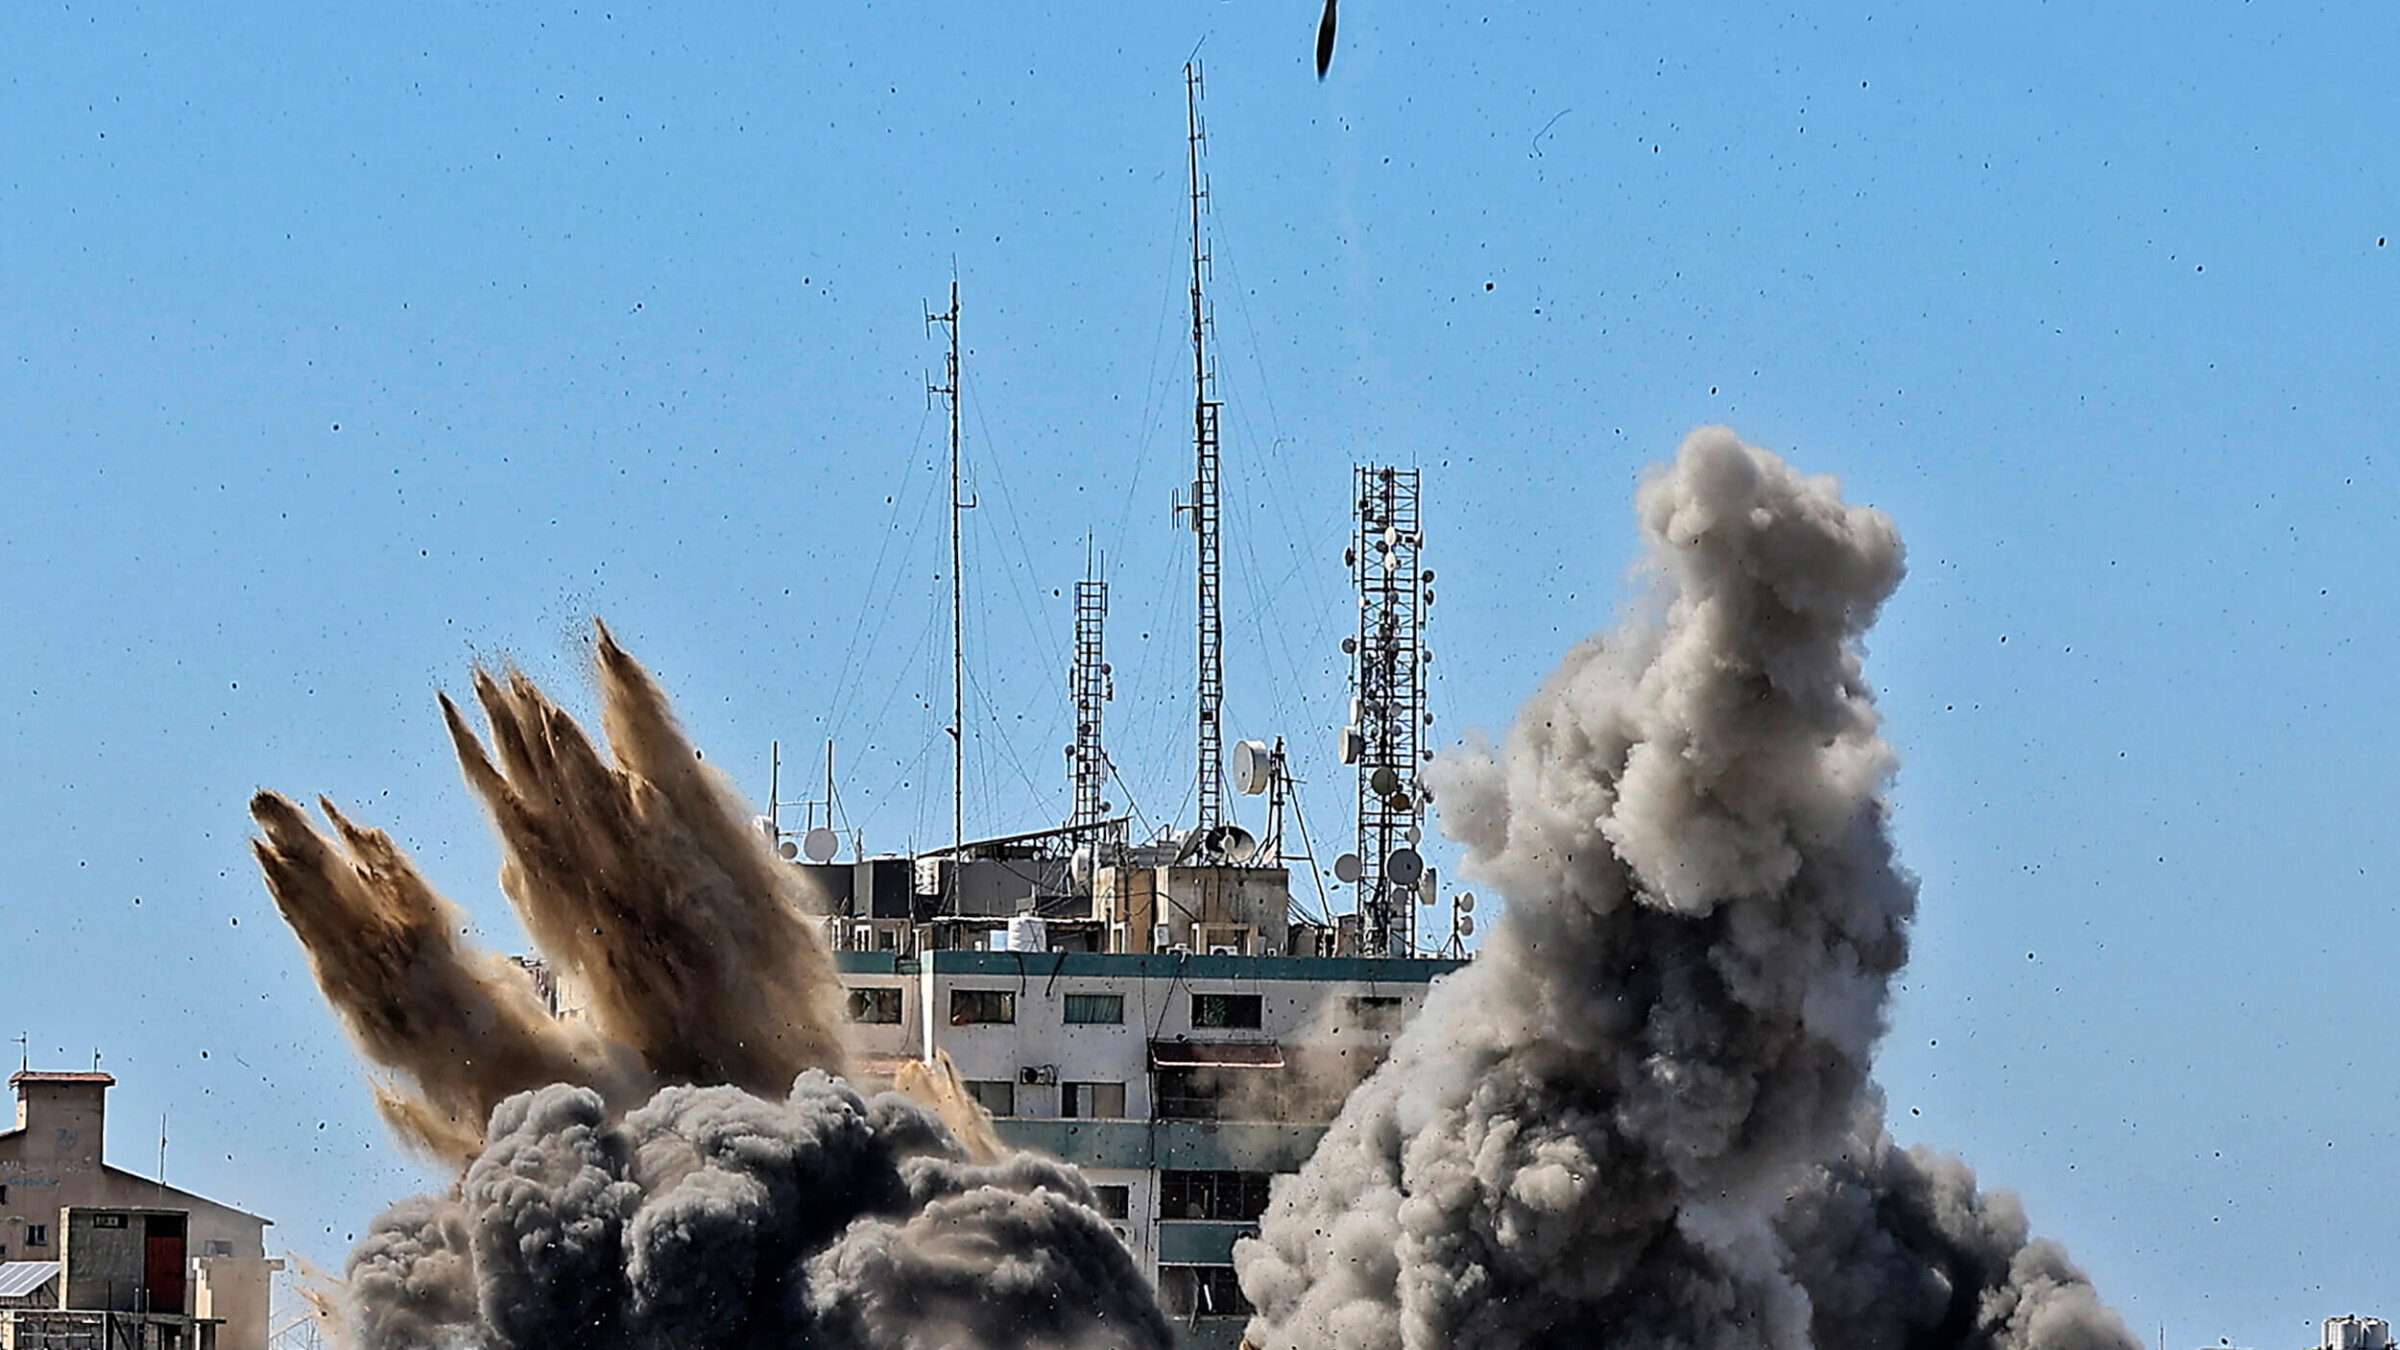 Smoke billows amid an Israeli airstrike on the Jala Tower, which housed Associated Press offices in Gaza, in 2021.